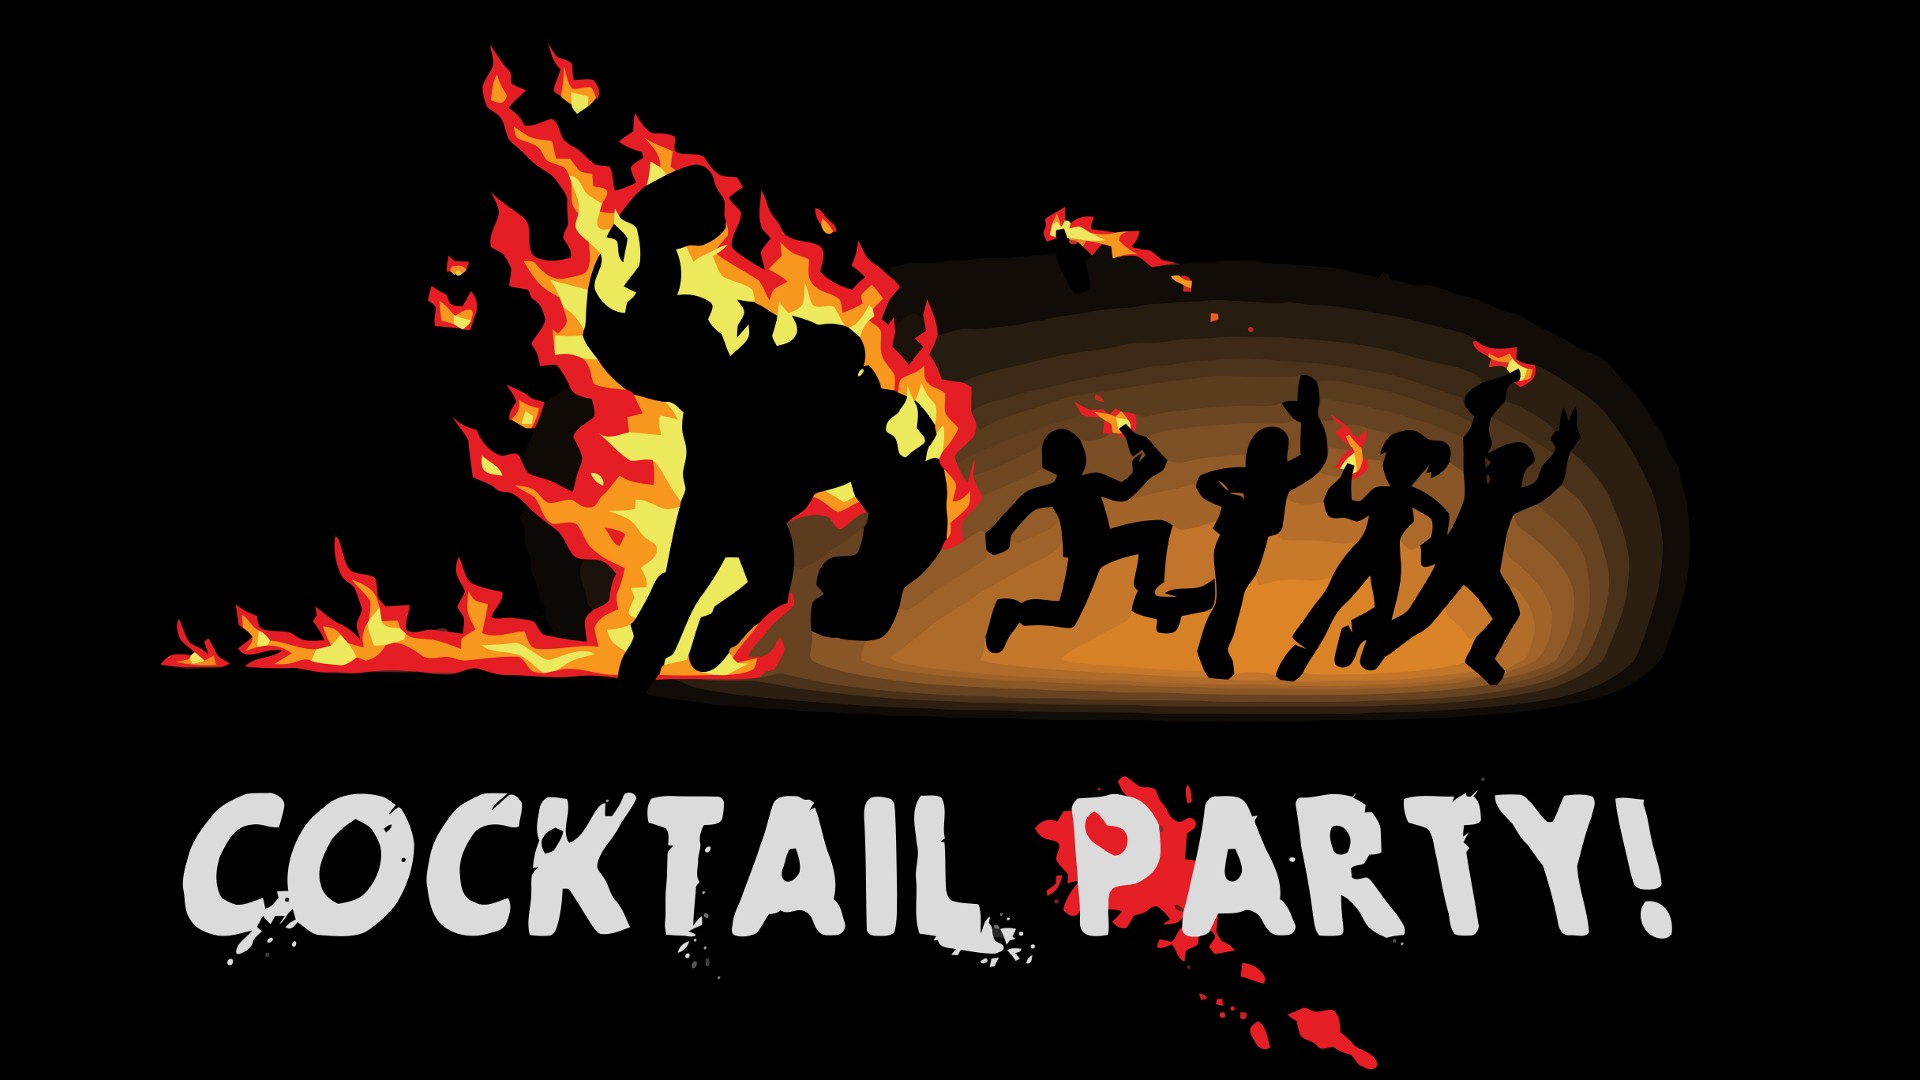 Download the Cocktail Party Wallpaper, Cocktail Party iPhone ...